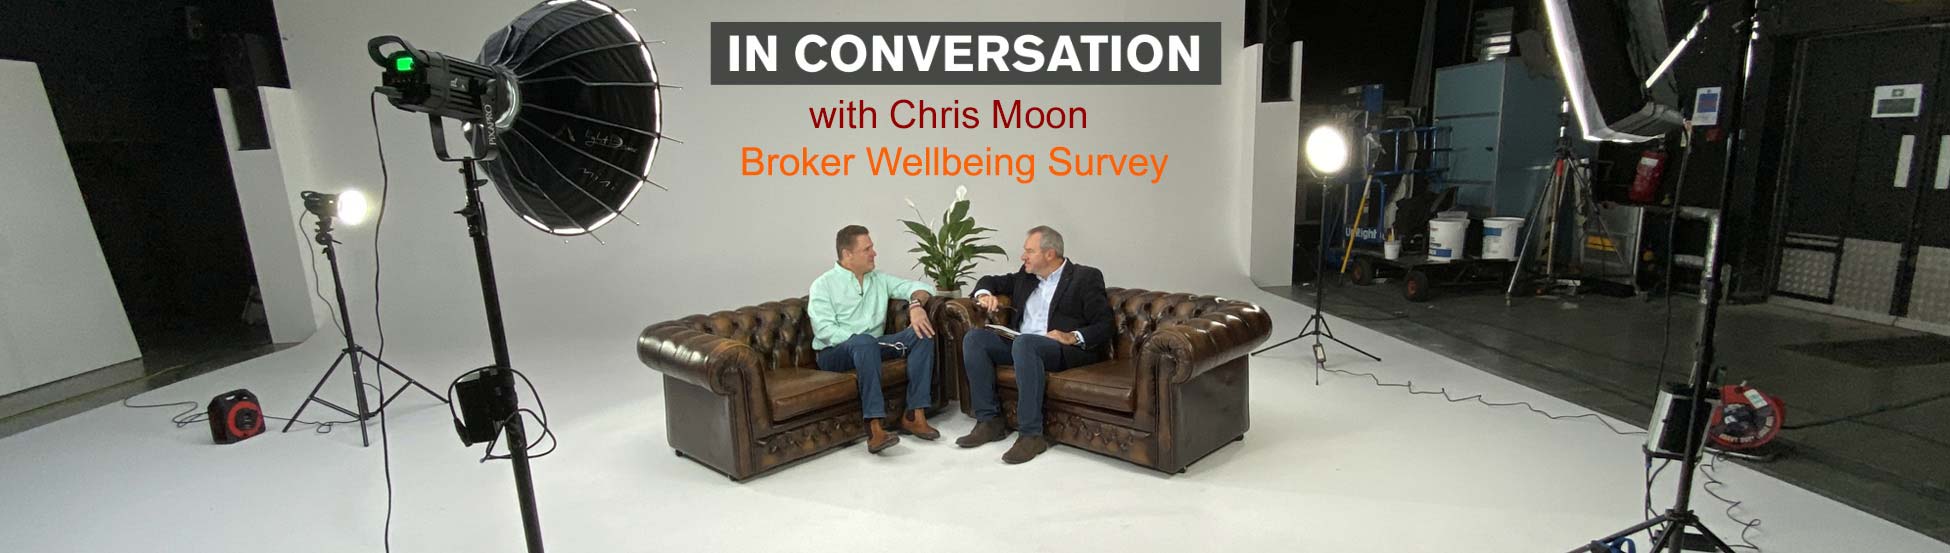 Broker wellbeing - in conversation with Chris Moon